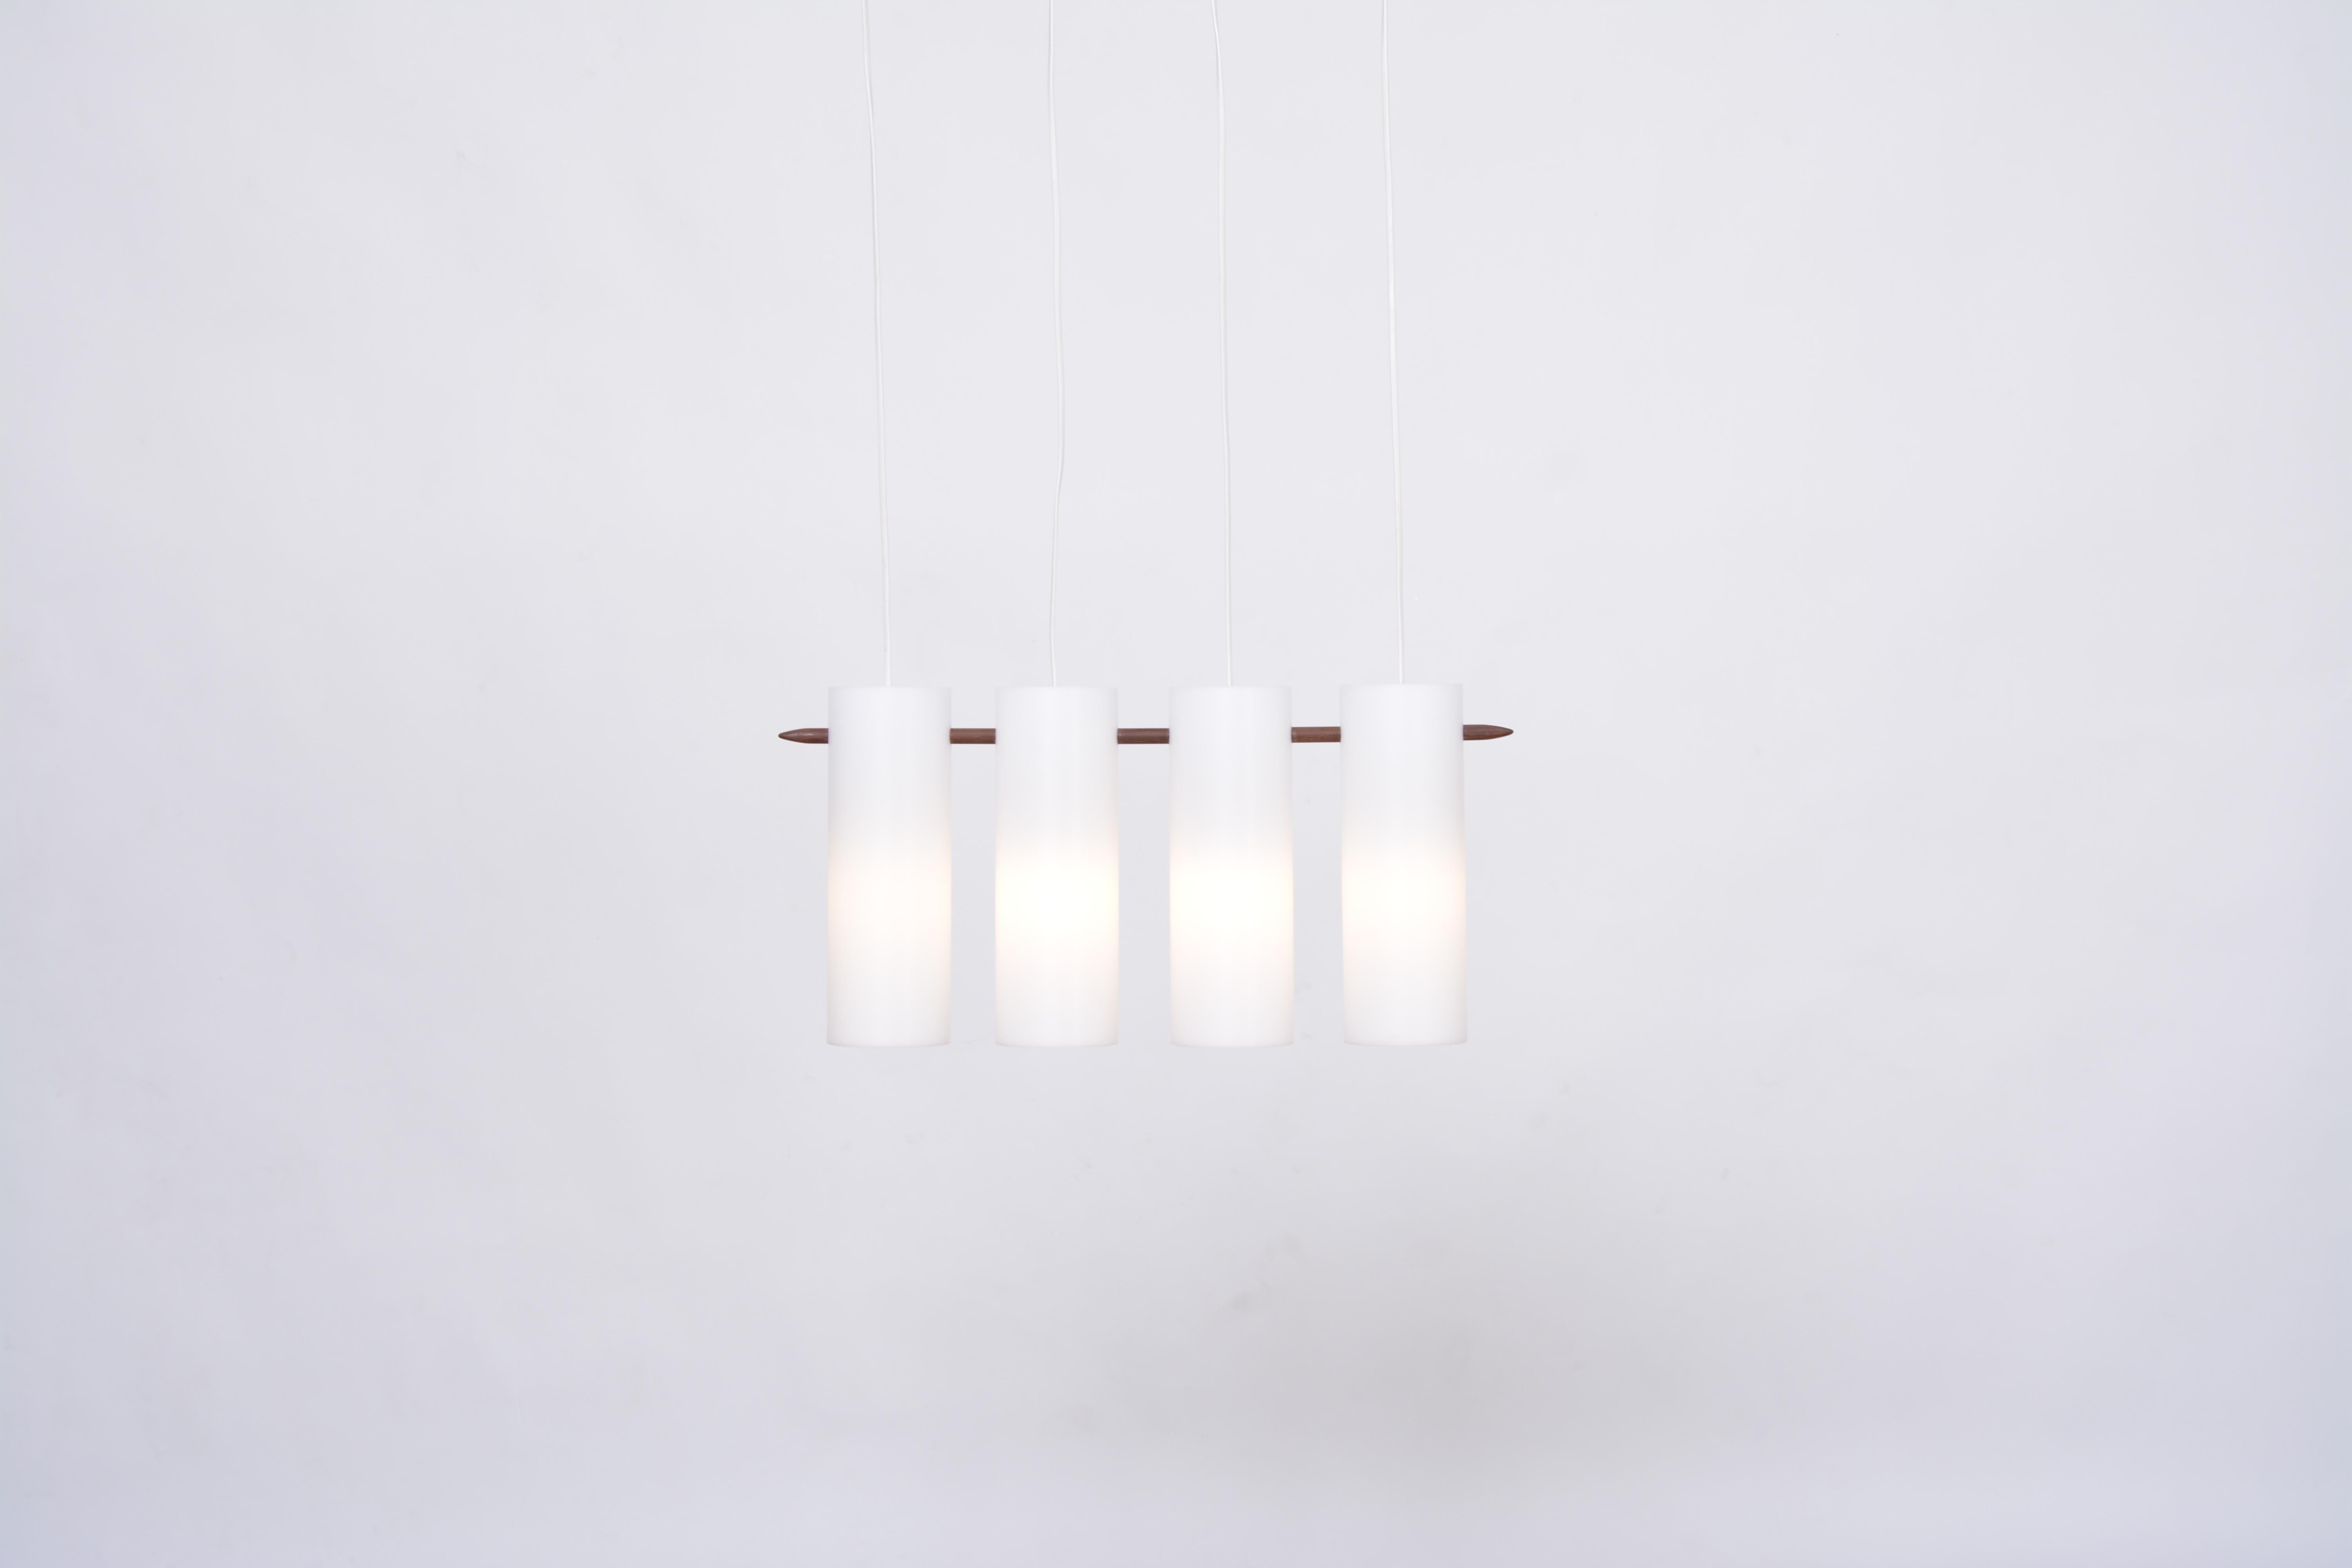 Swedish Mid-Century Modern pendant lamp by Uno and Östen Kristiansson for Luxus.
This minimal Mid-Century Modern pendant lamp or hanging light was designed by Swedish brothers Uno & Östen Kristiansson and produced by their company Luxus in Vittsjö,